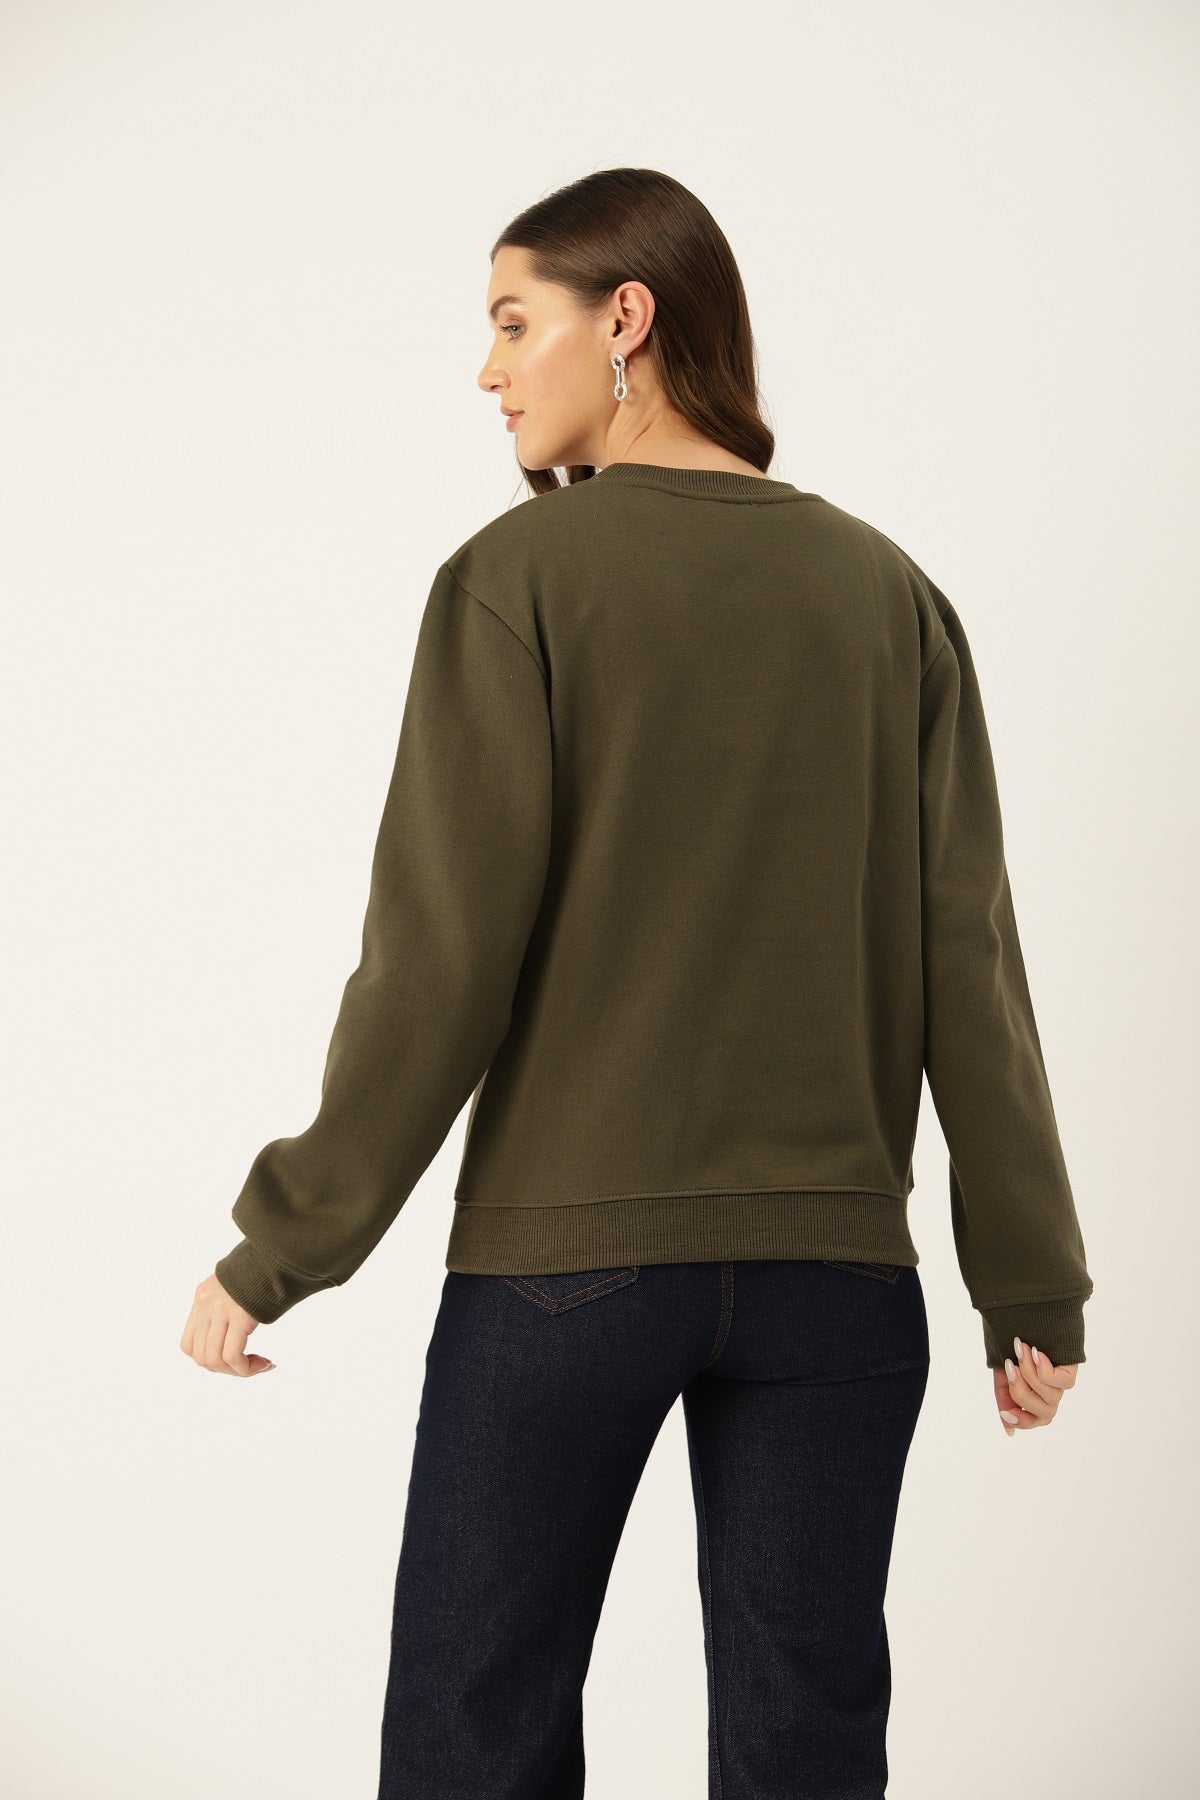 Buy Two Sweatshirts Blue And Olive Green